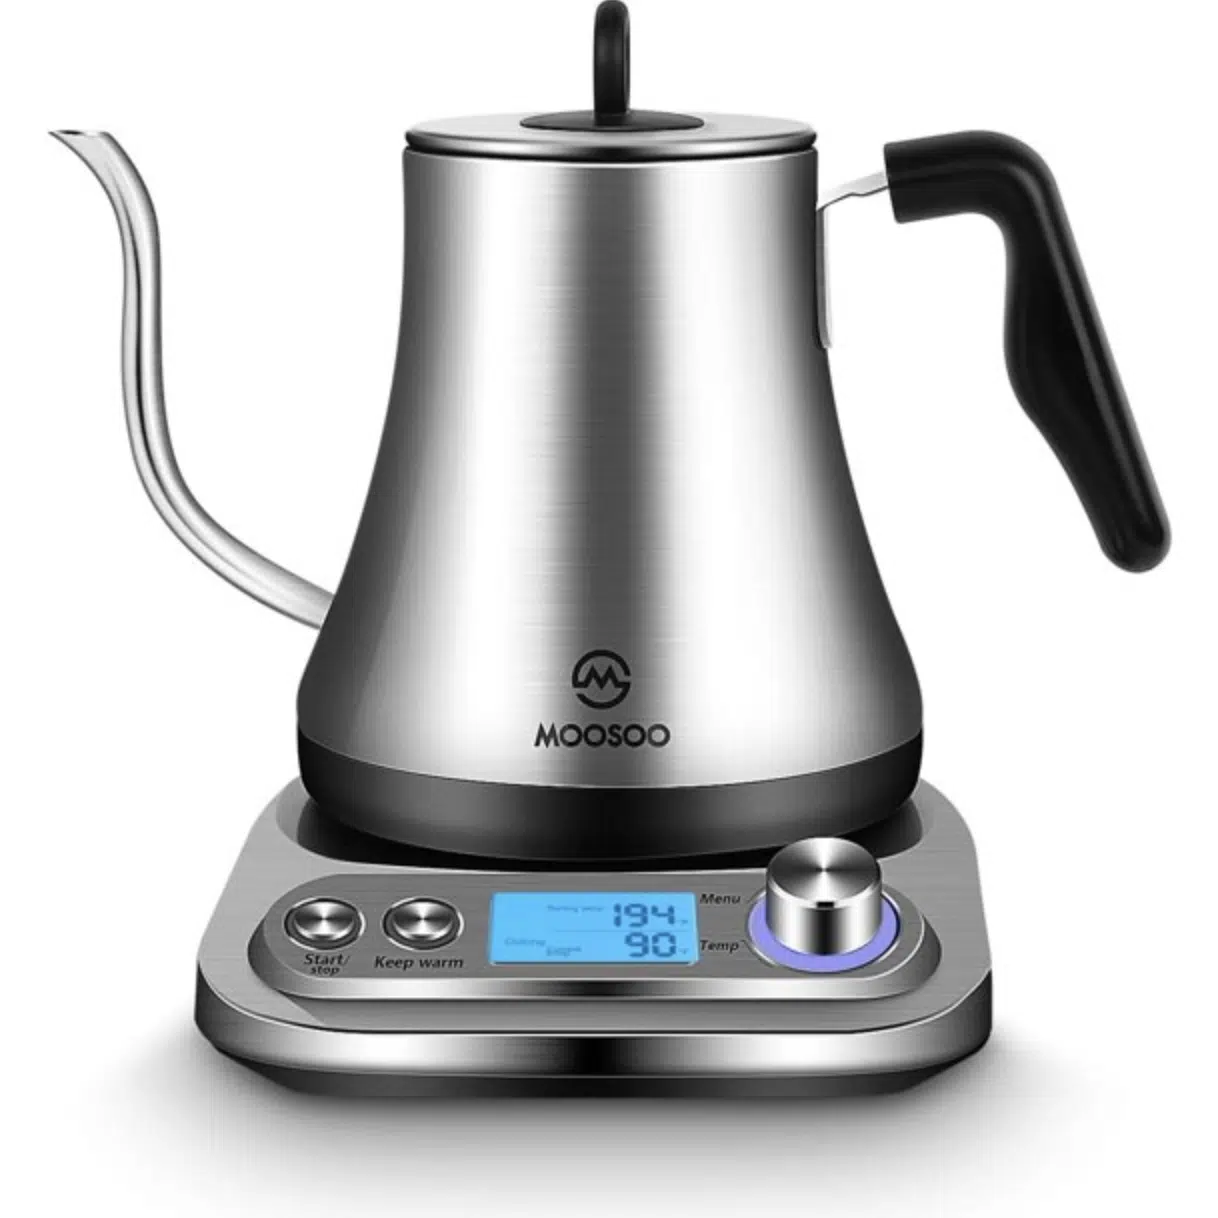 How To Choose A Gooseneck Kettle For Pour Over Coffee – Rogue Wave Coffee